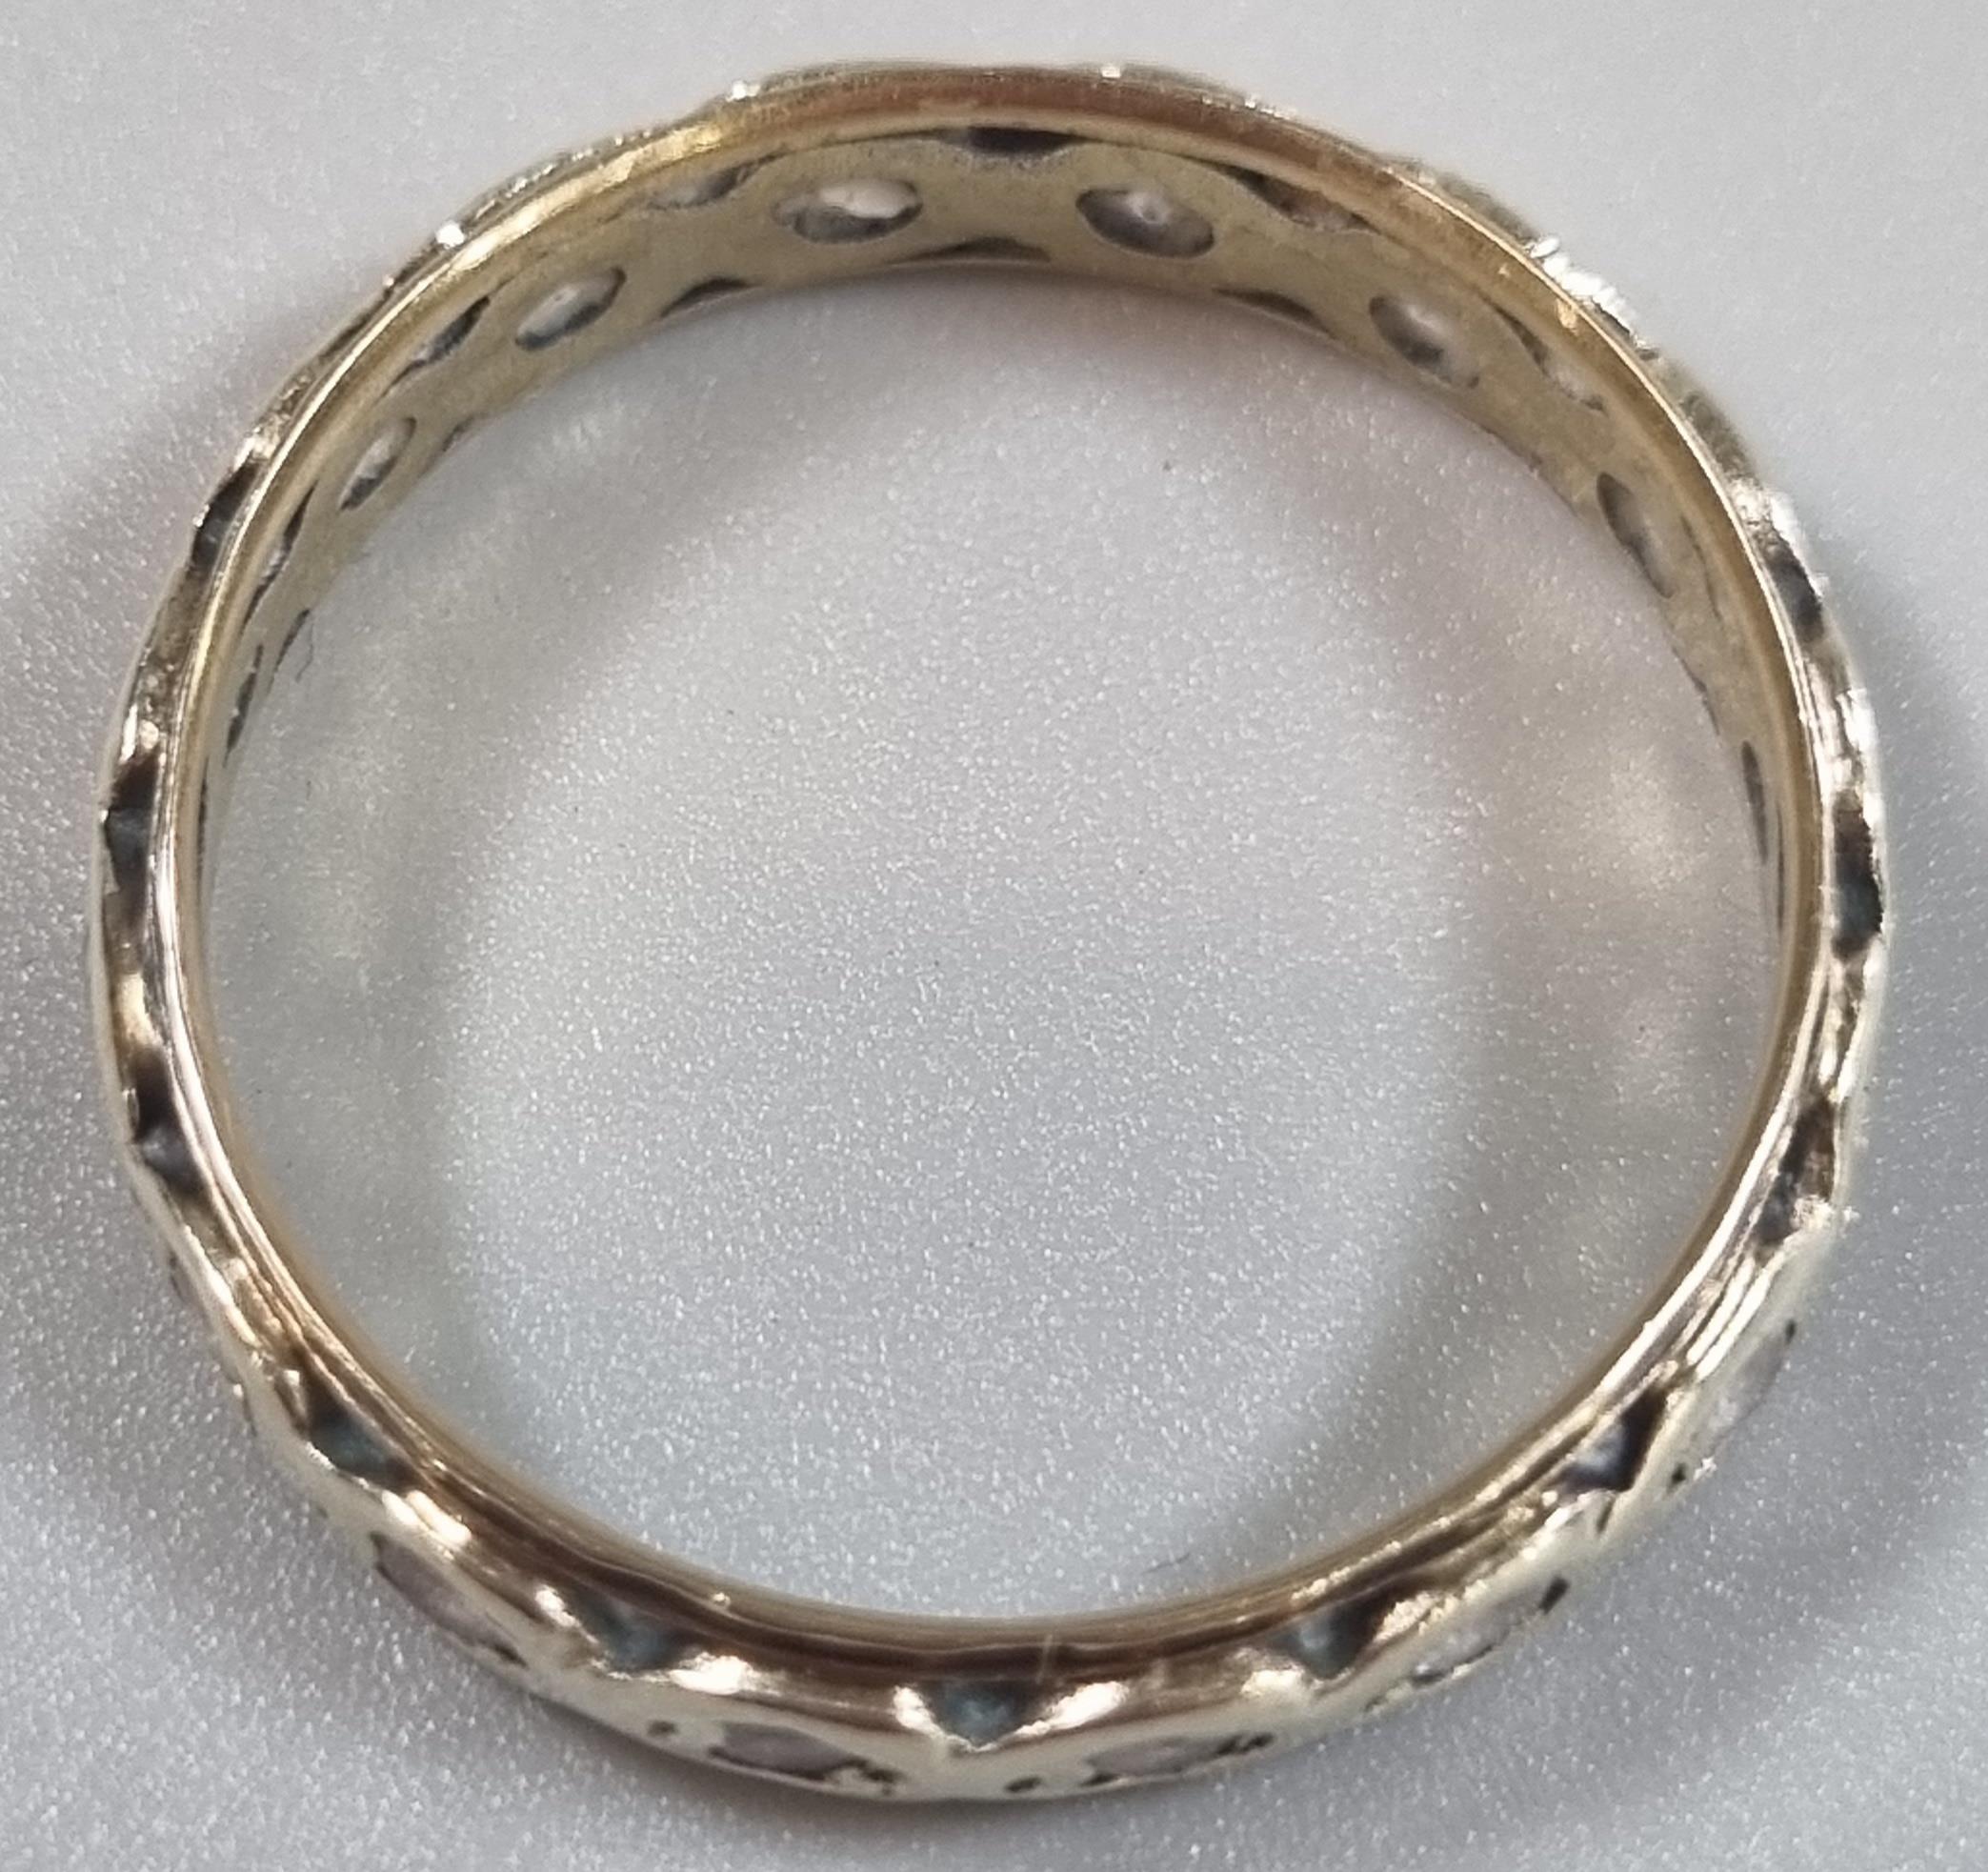 9ct gold eternity style ring. 2.6g approx. Size P1/2. (B.P. 21% + VAT) - Image 3 of 4